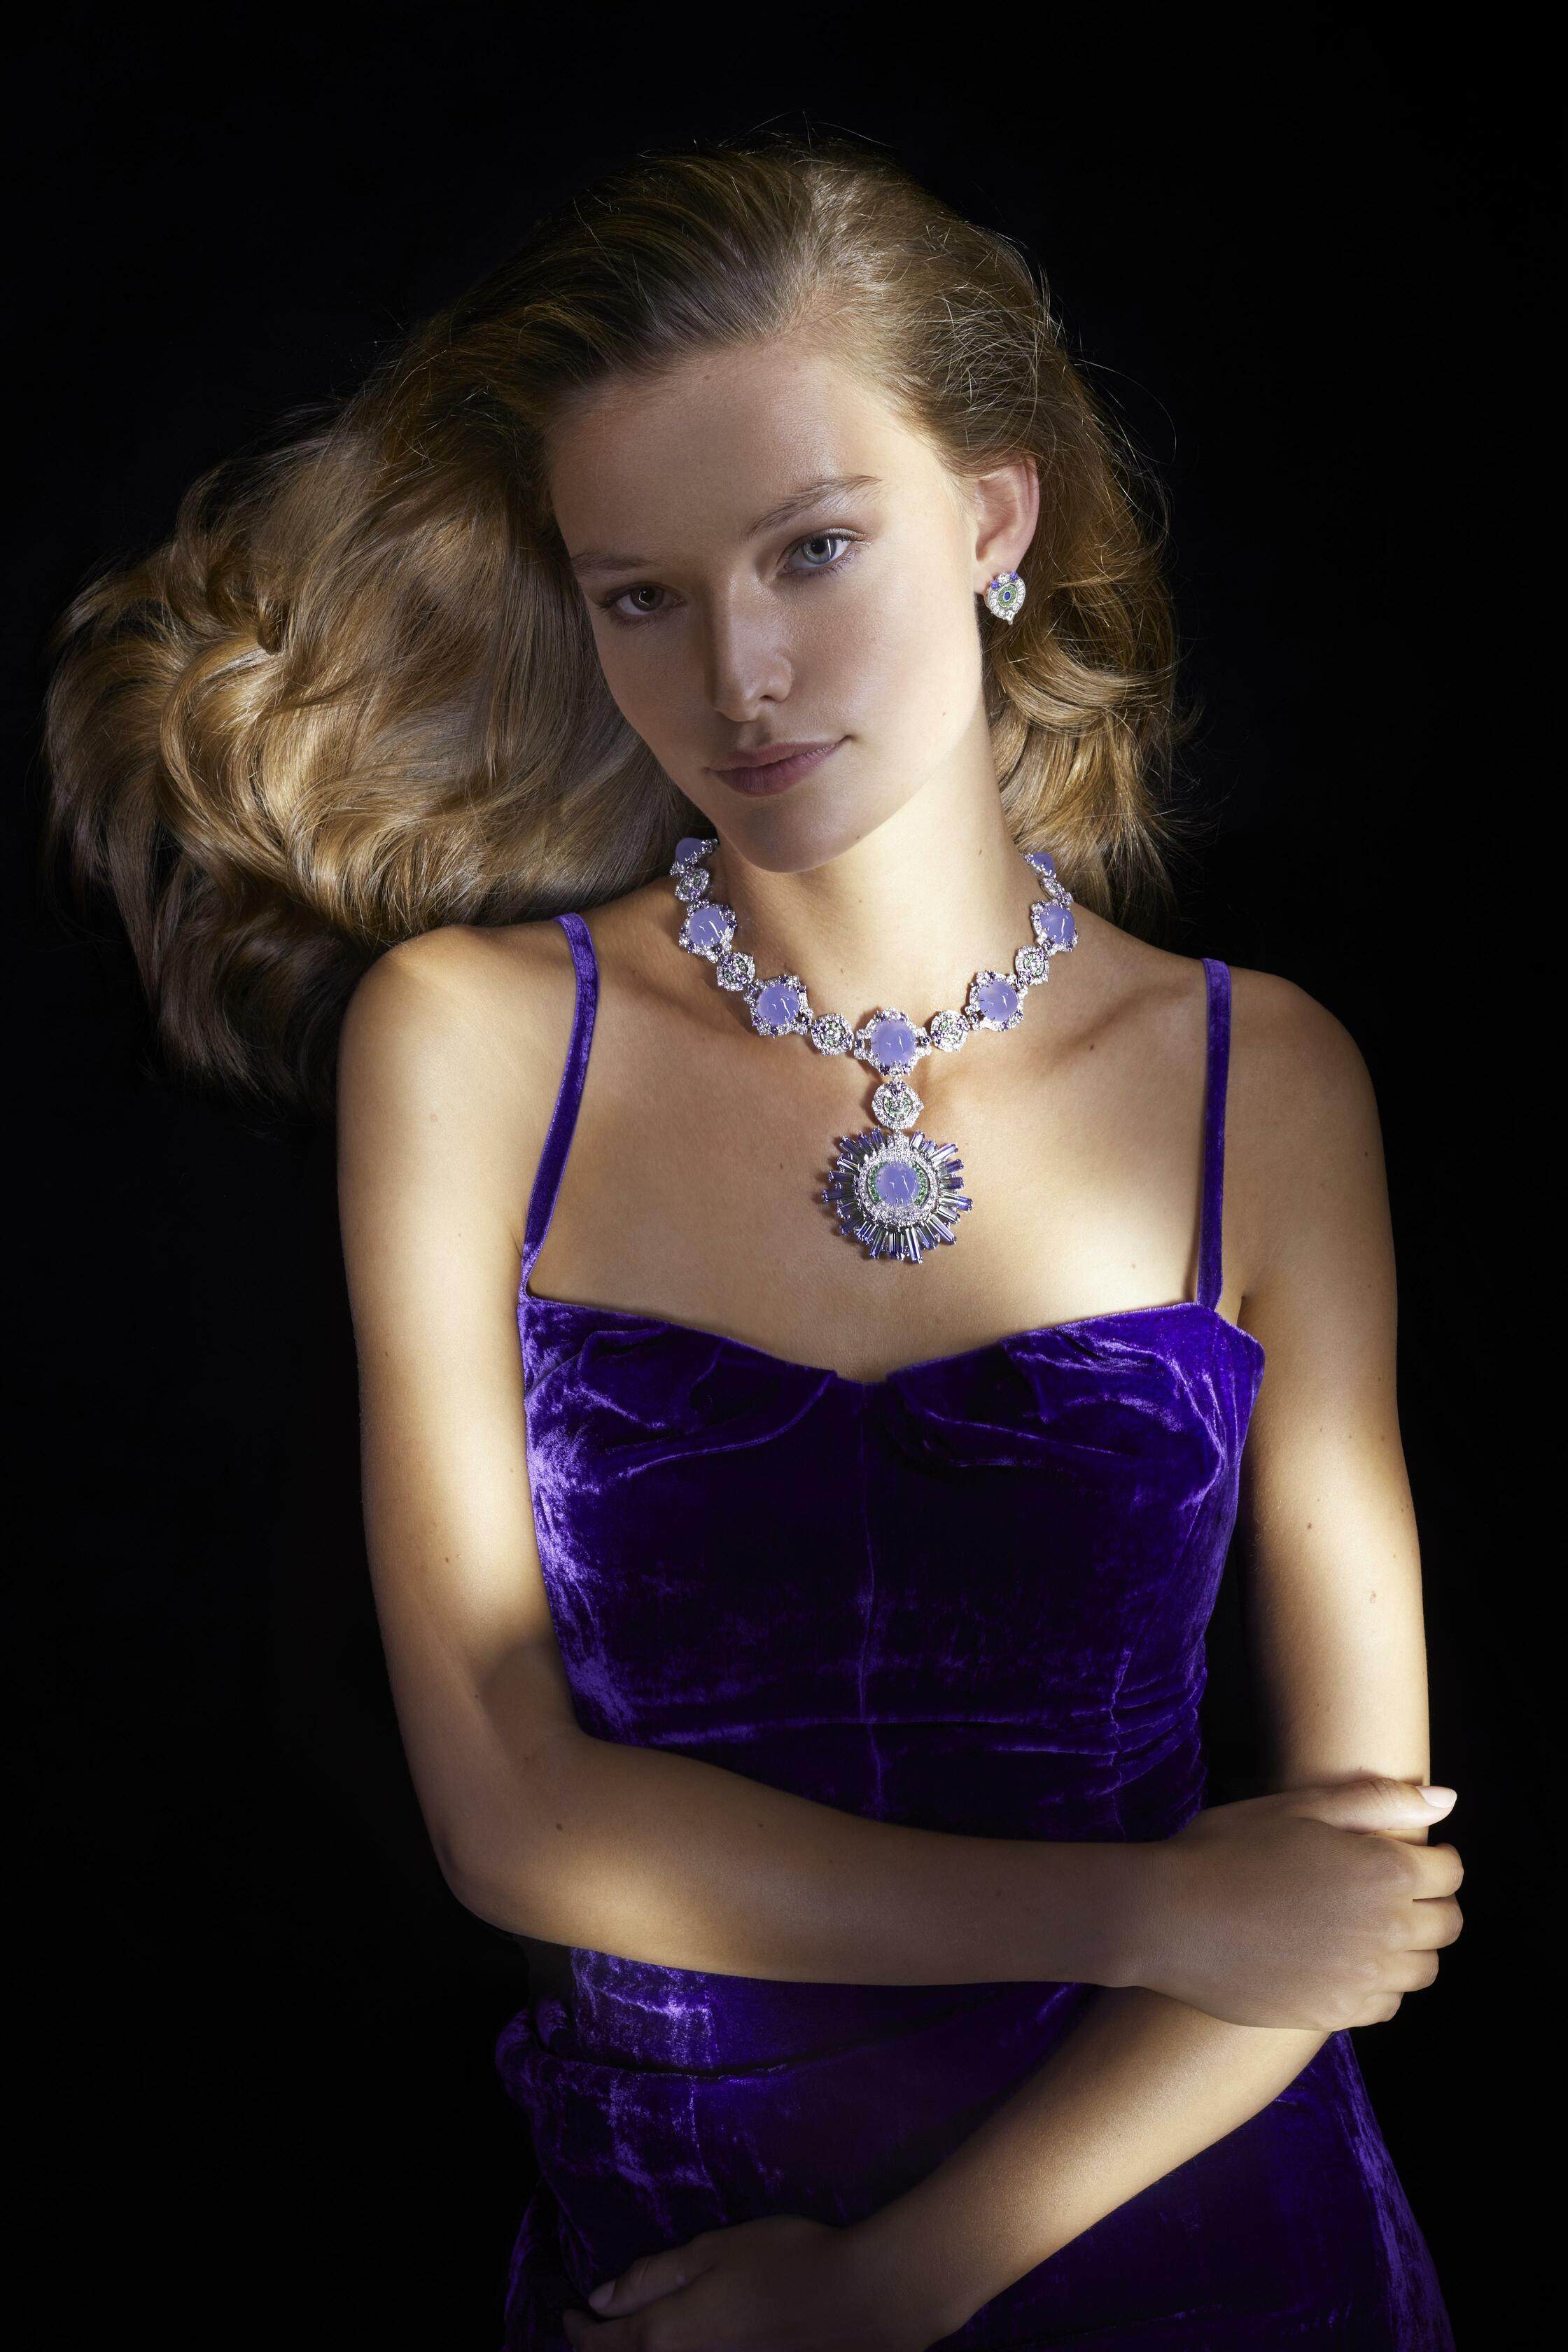 Heavenly Dreams necklace and earrings from the Sous les Étoiles collection. Photo: Van Cleef & Arpels